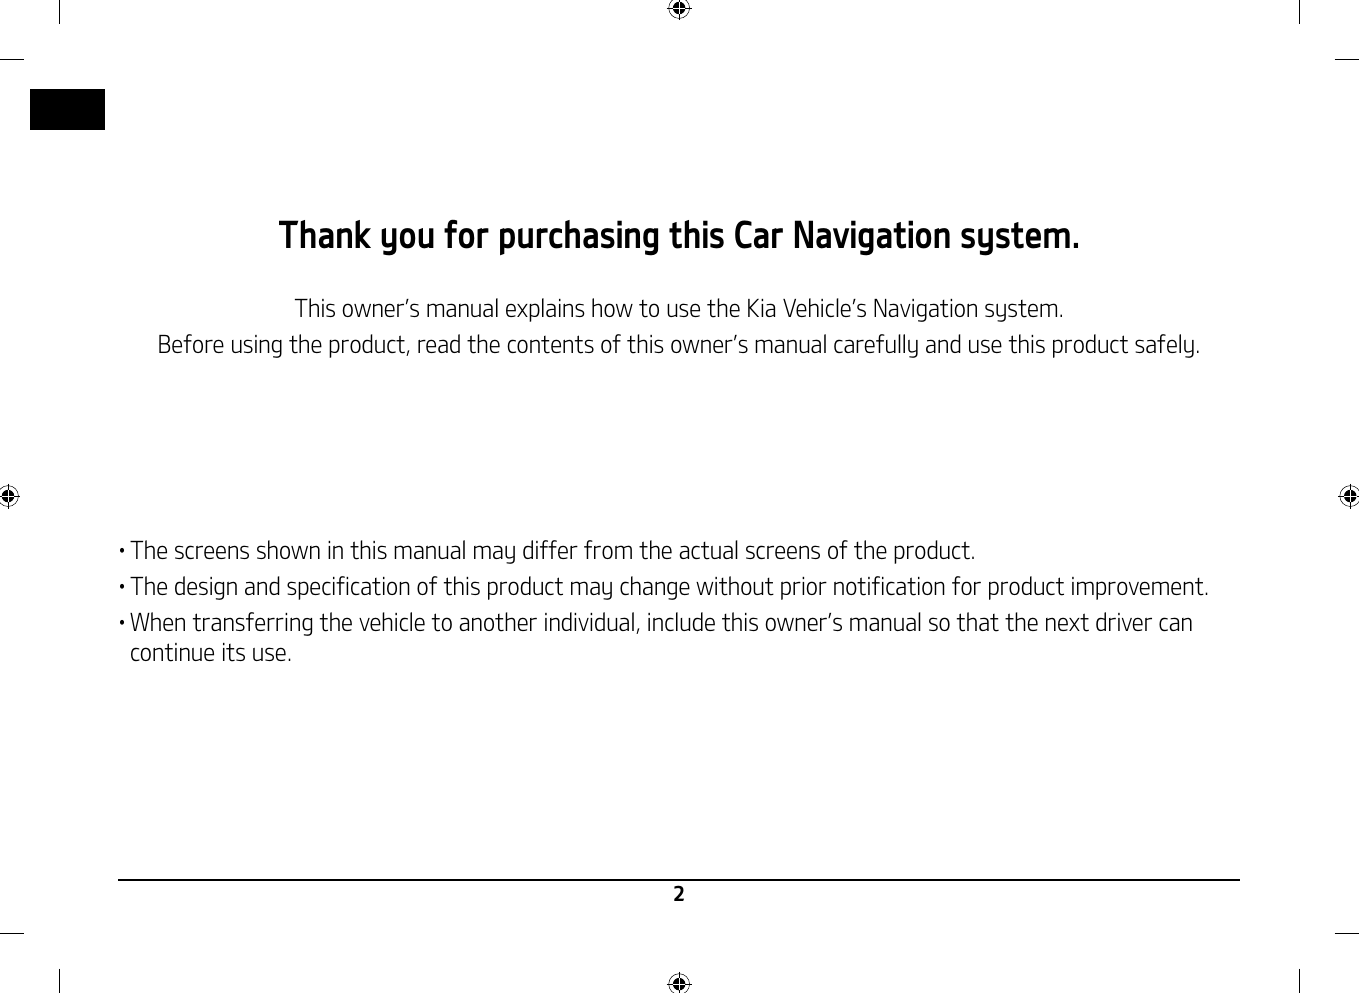 2Thank you for purchasing this Car Navigation system.This owner䳓s manual explains how to use the Kia Vehicle䳓s Navigation system.Before using the product, read the contents of this owner䳓s manual carefully and use this product safely.䳜 The screens shown in this manual may differ from the actual screens of the product.䳜 The design and specification of this product may change without prior notification for product improvement.䳜 When transferring the vehicle to another individual, include this owner䳓s manual so that the next driver can continue its use.    